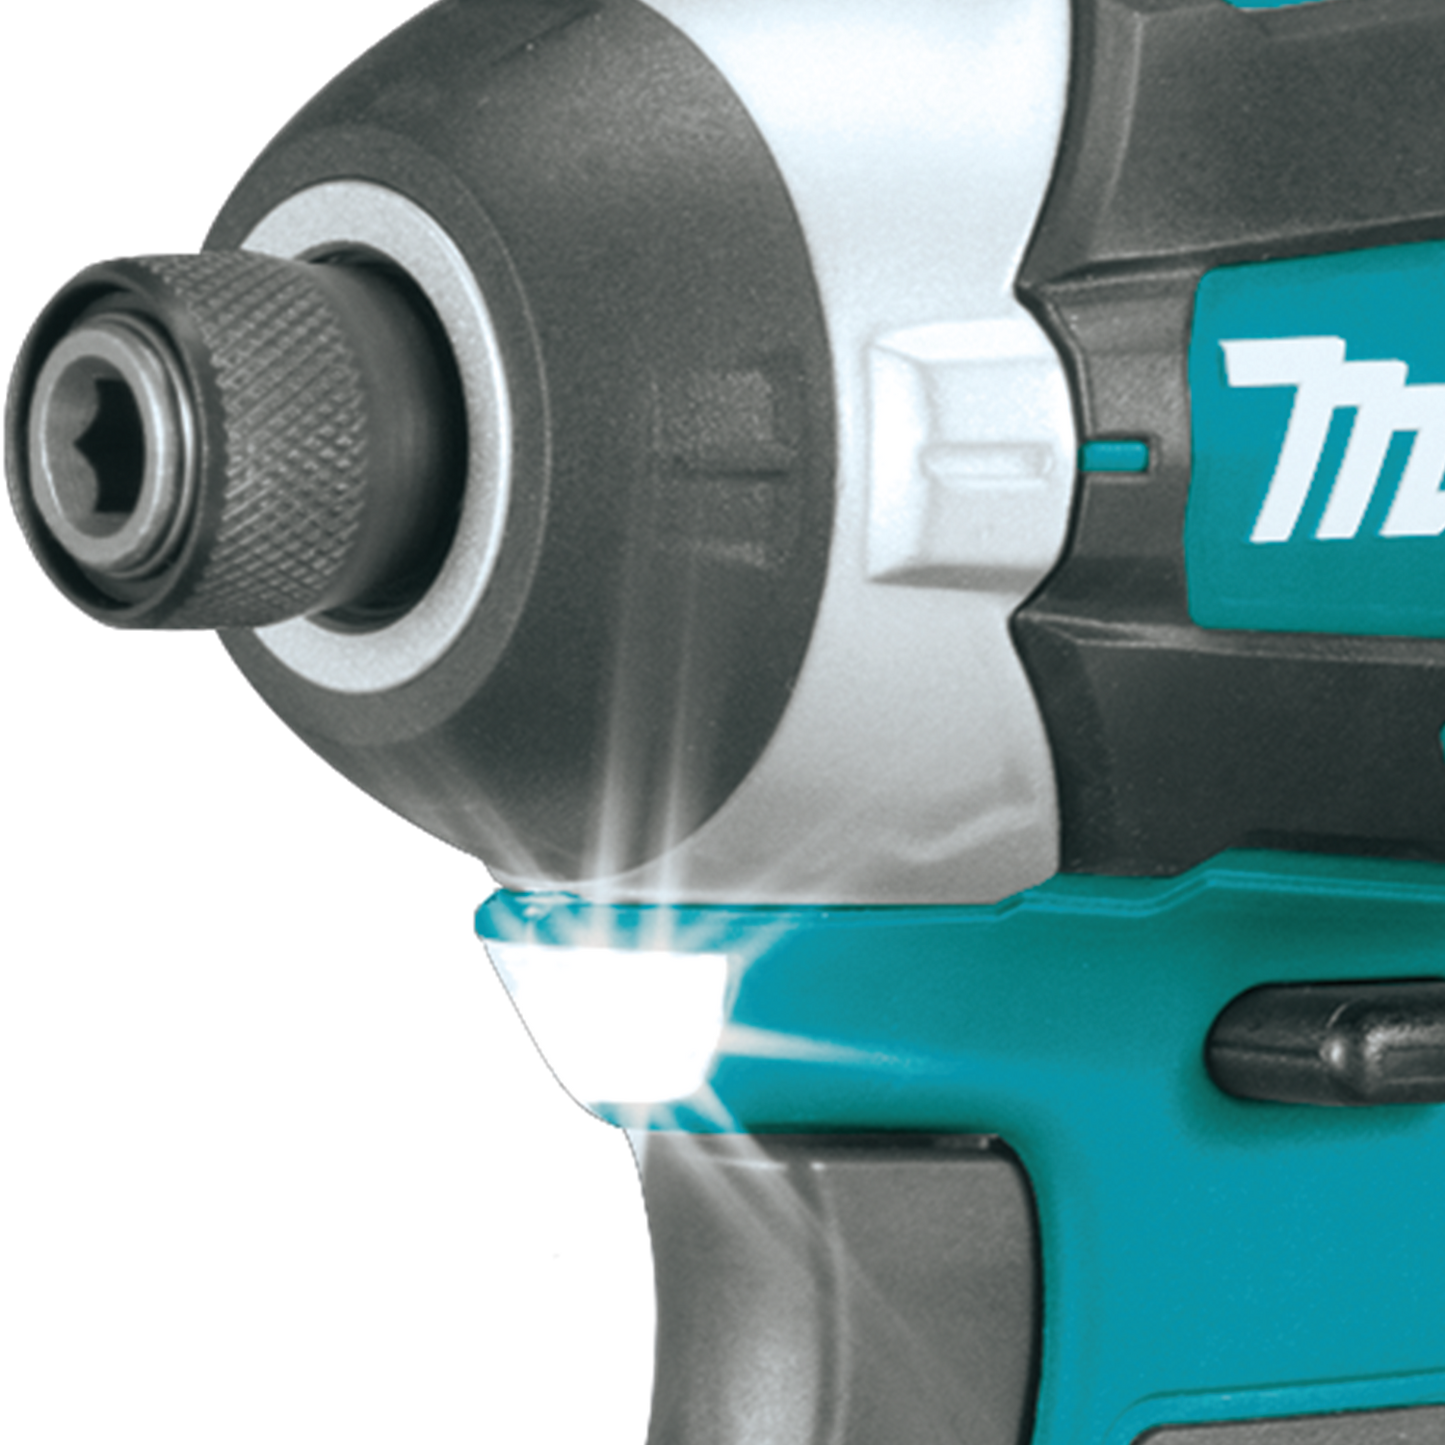 Makita 18V LXT Brushles Impact Driver Factory Serviced (Tool Only)